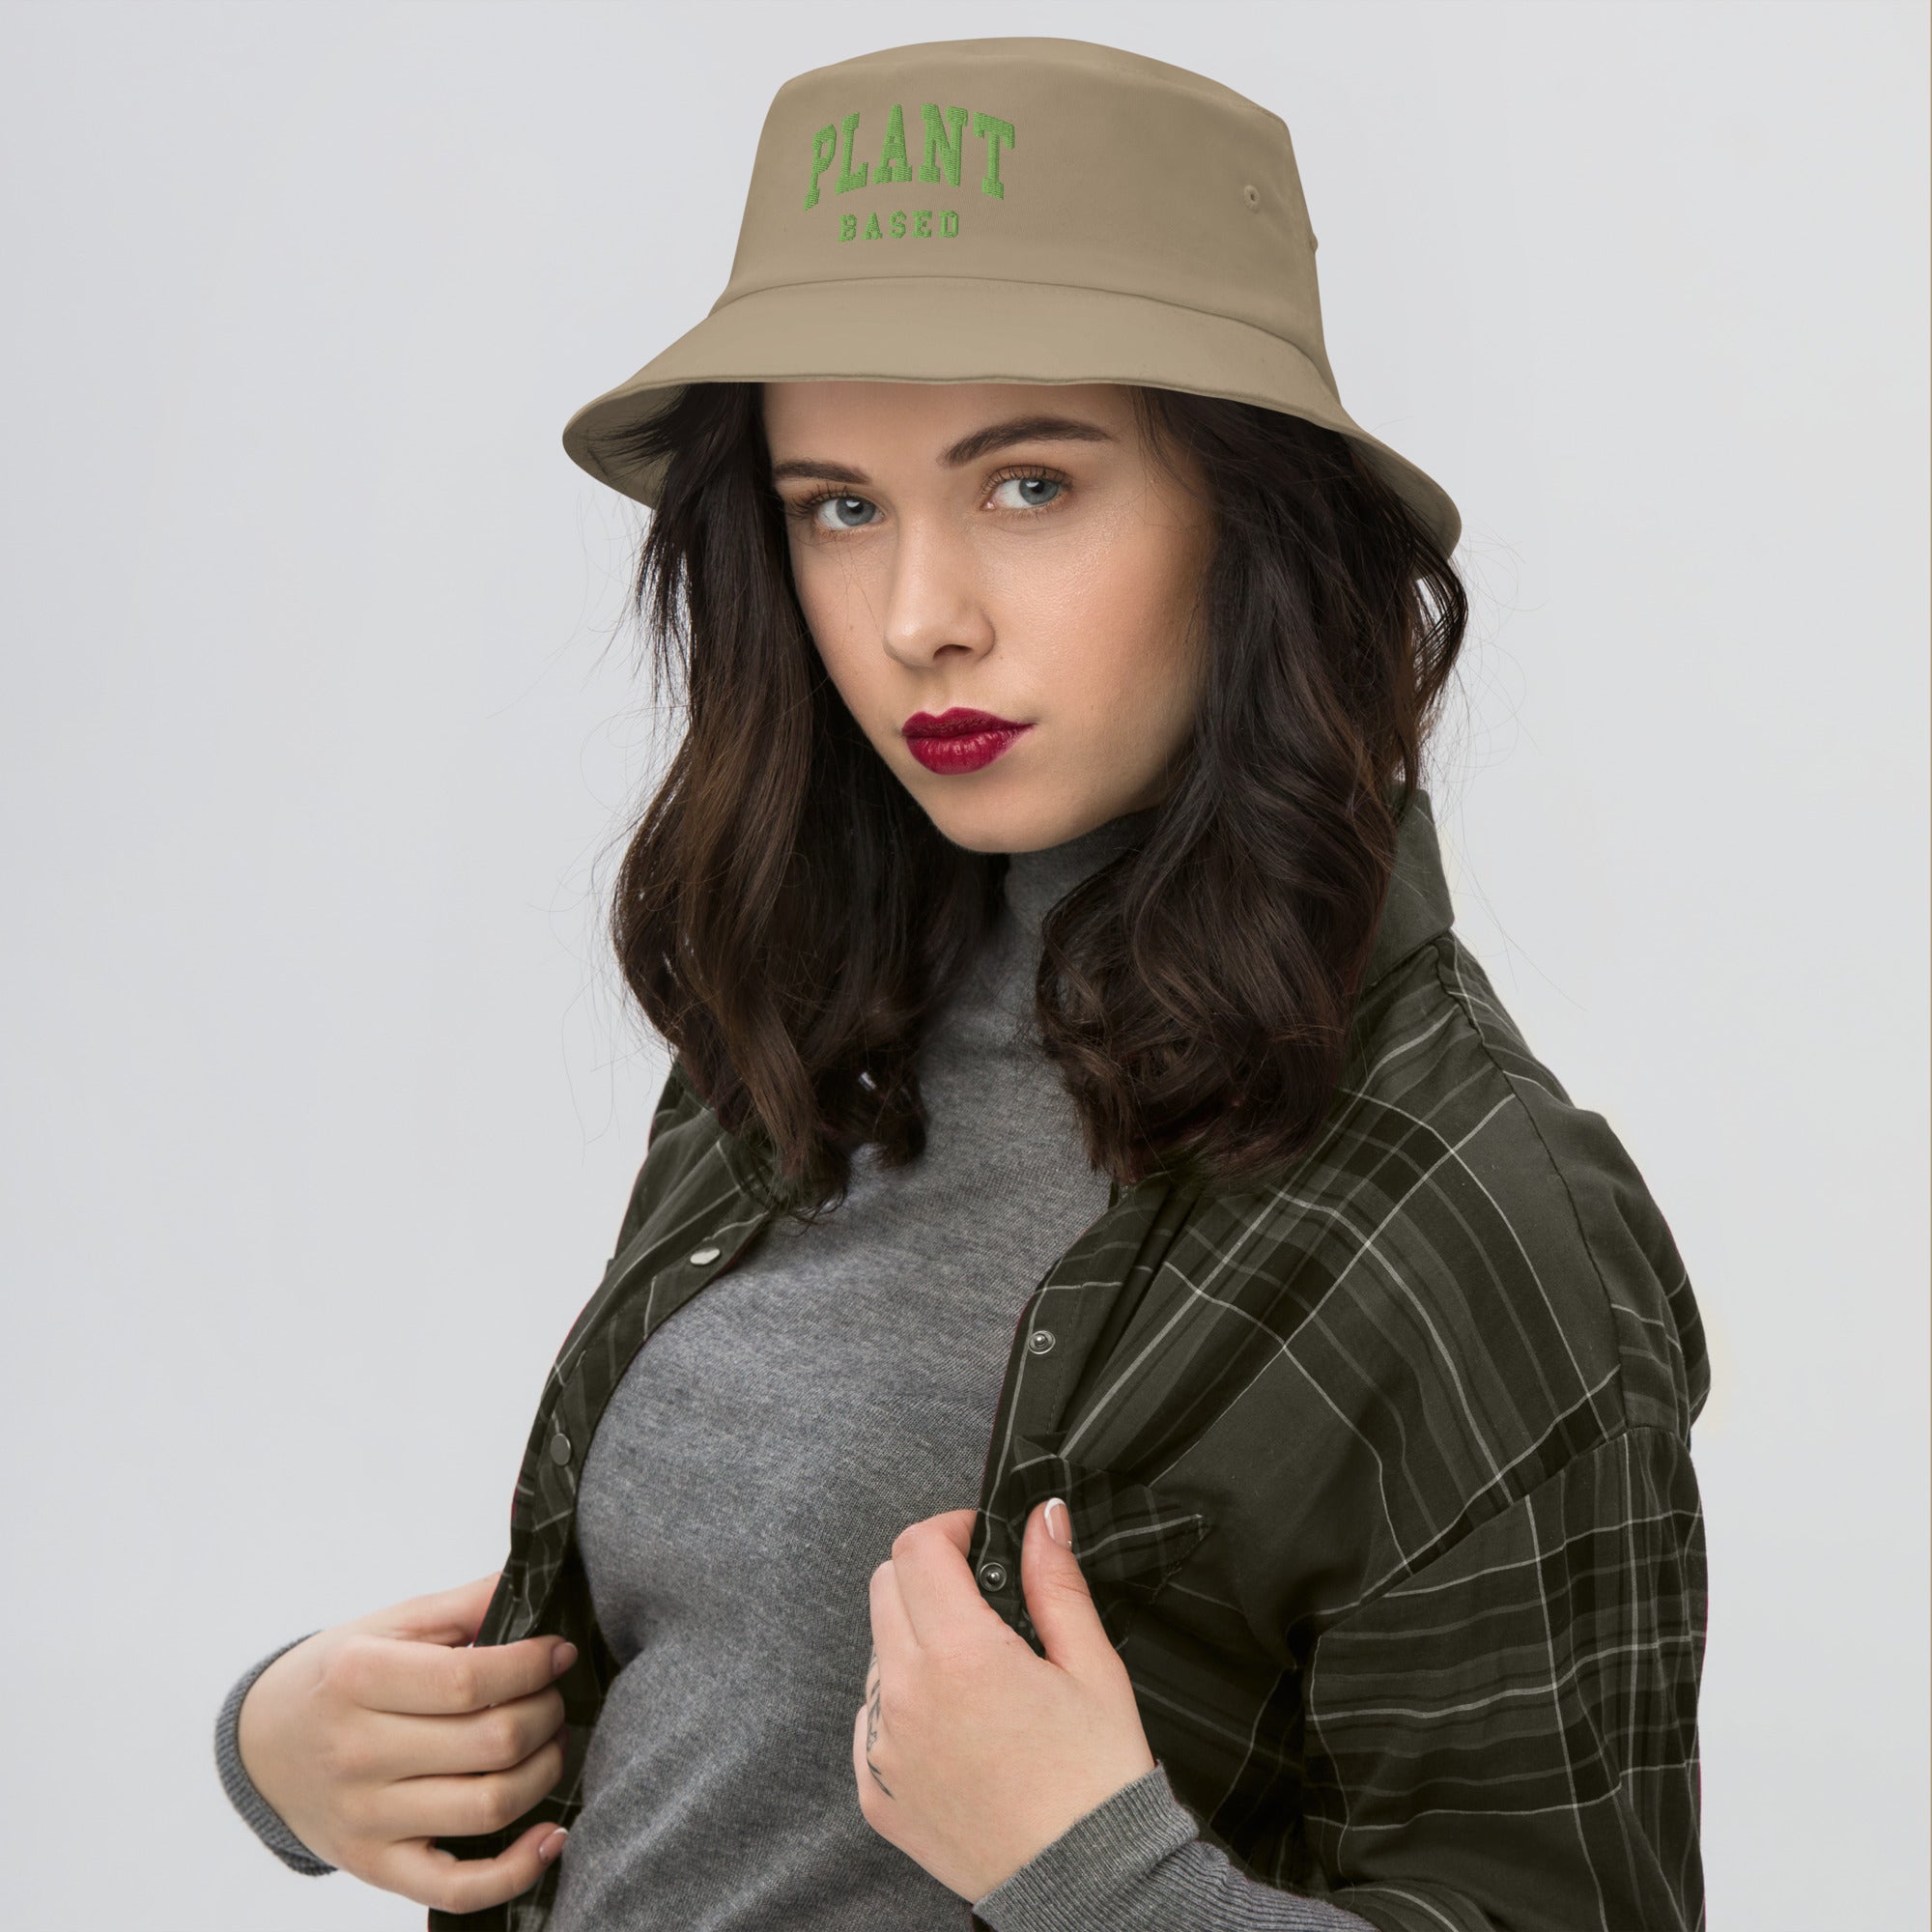 Plant Based - Embroidered Bucket Hat